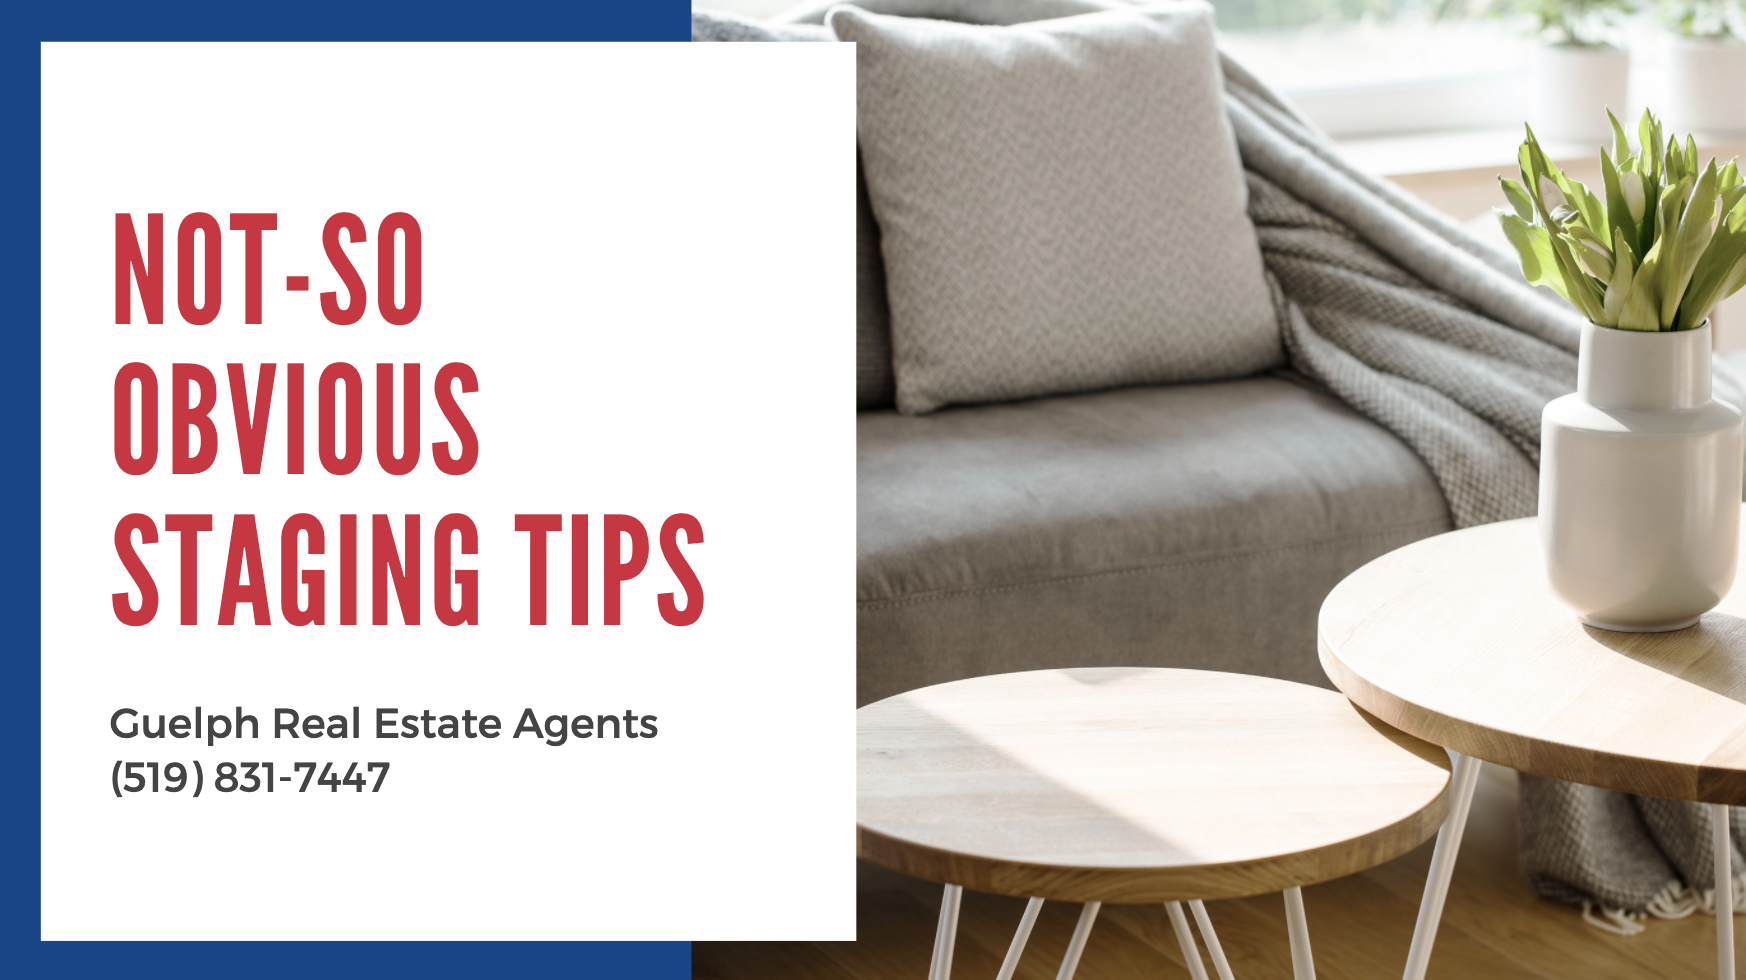 Guelph Real Estate Agents - Not So Obvious Staging Tricks